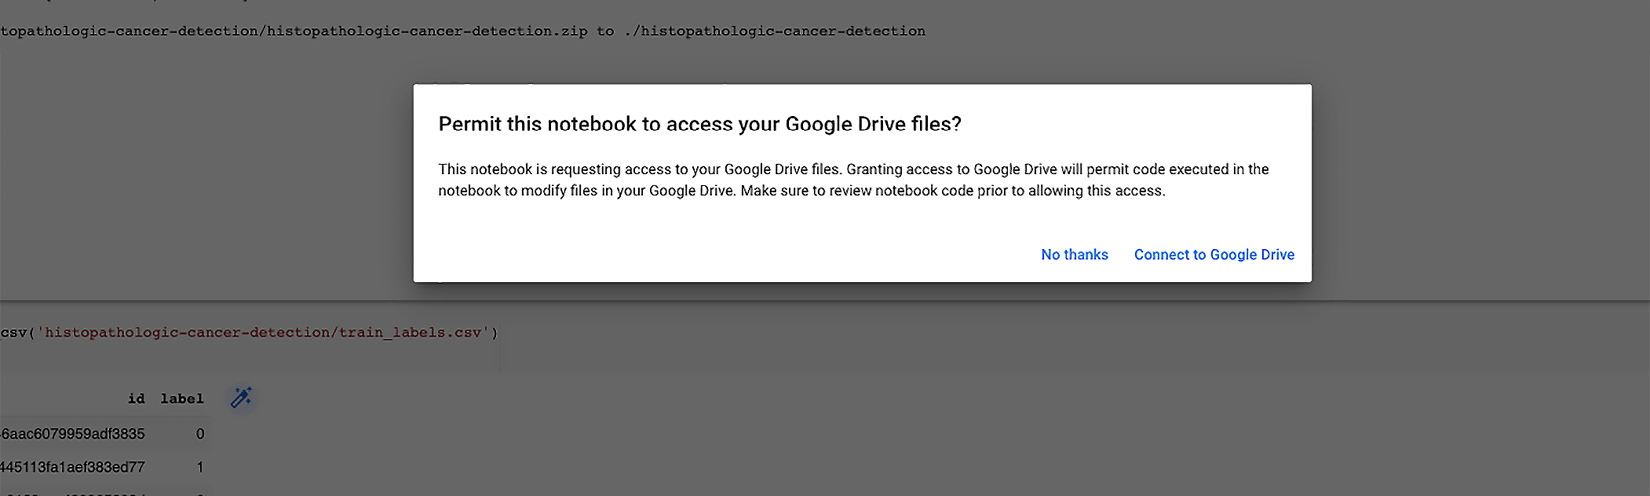 Figure 2.12 – Allowing access to Google Drive
